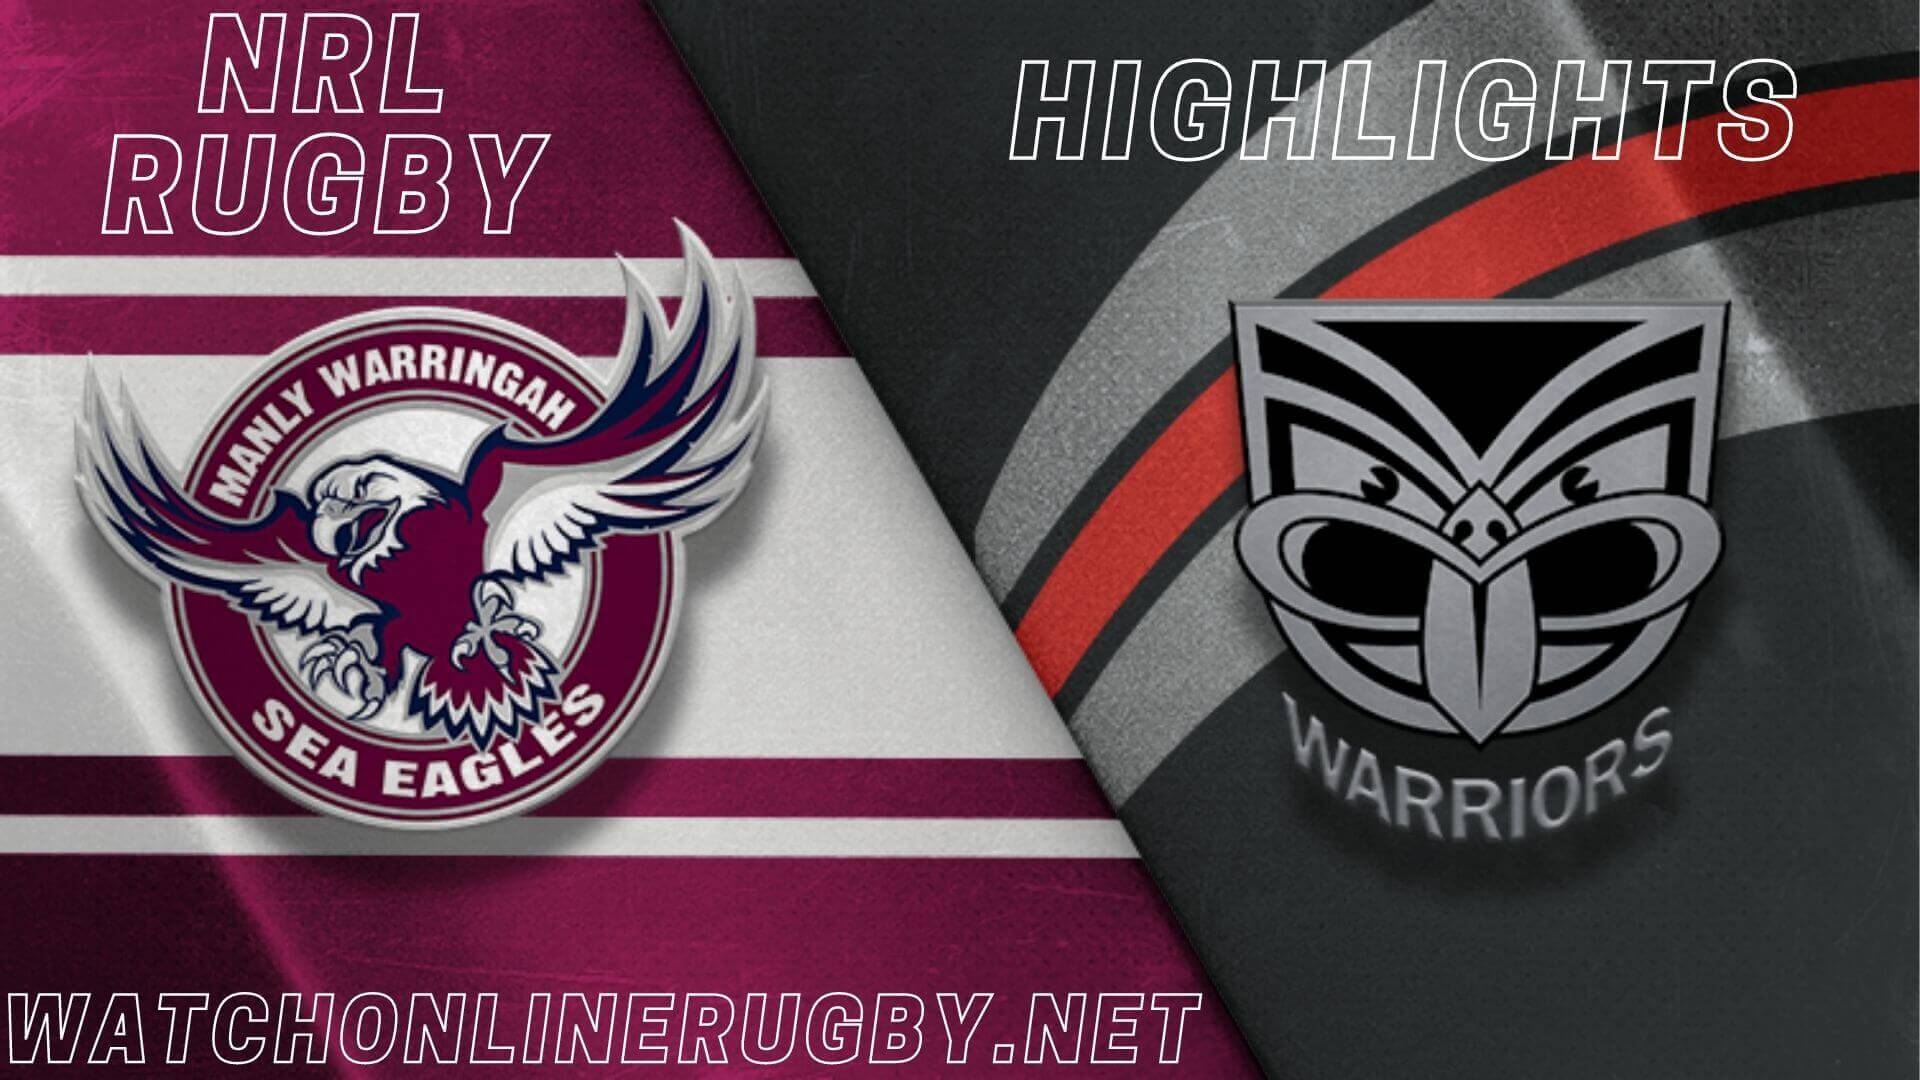 Sea Eagles Vs Warriors Highlights RD 13 NRL Rugby